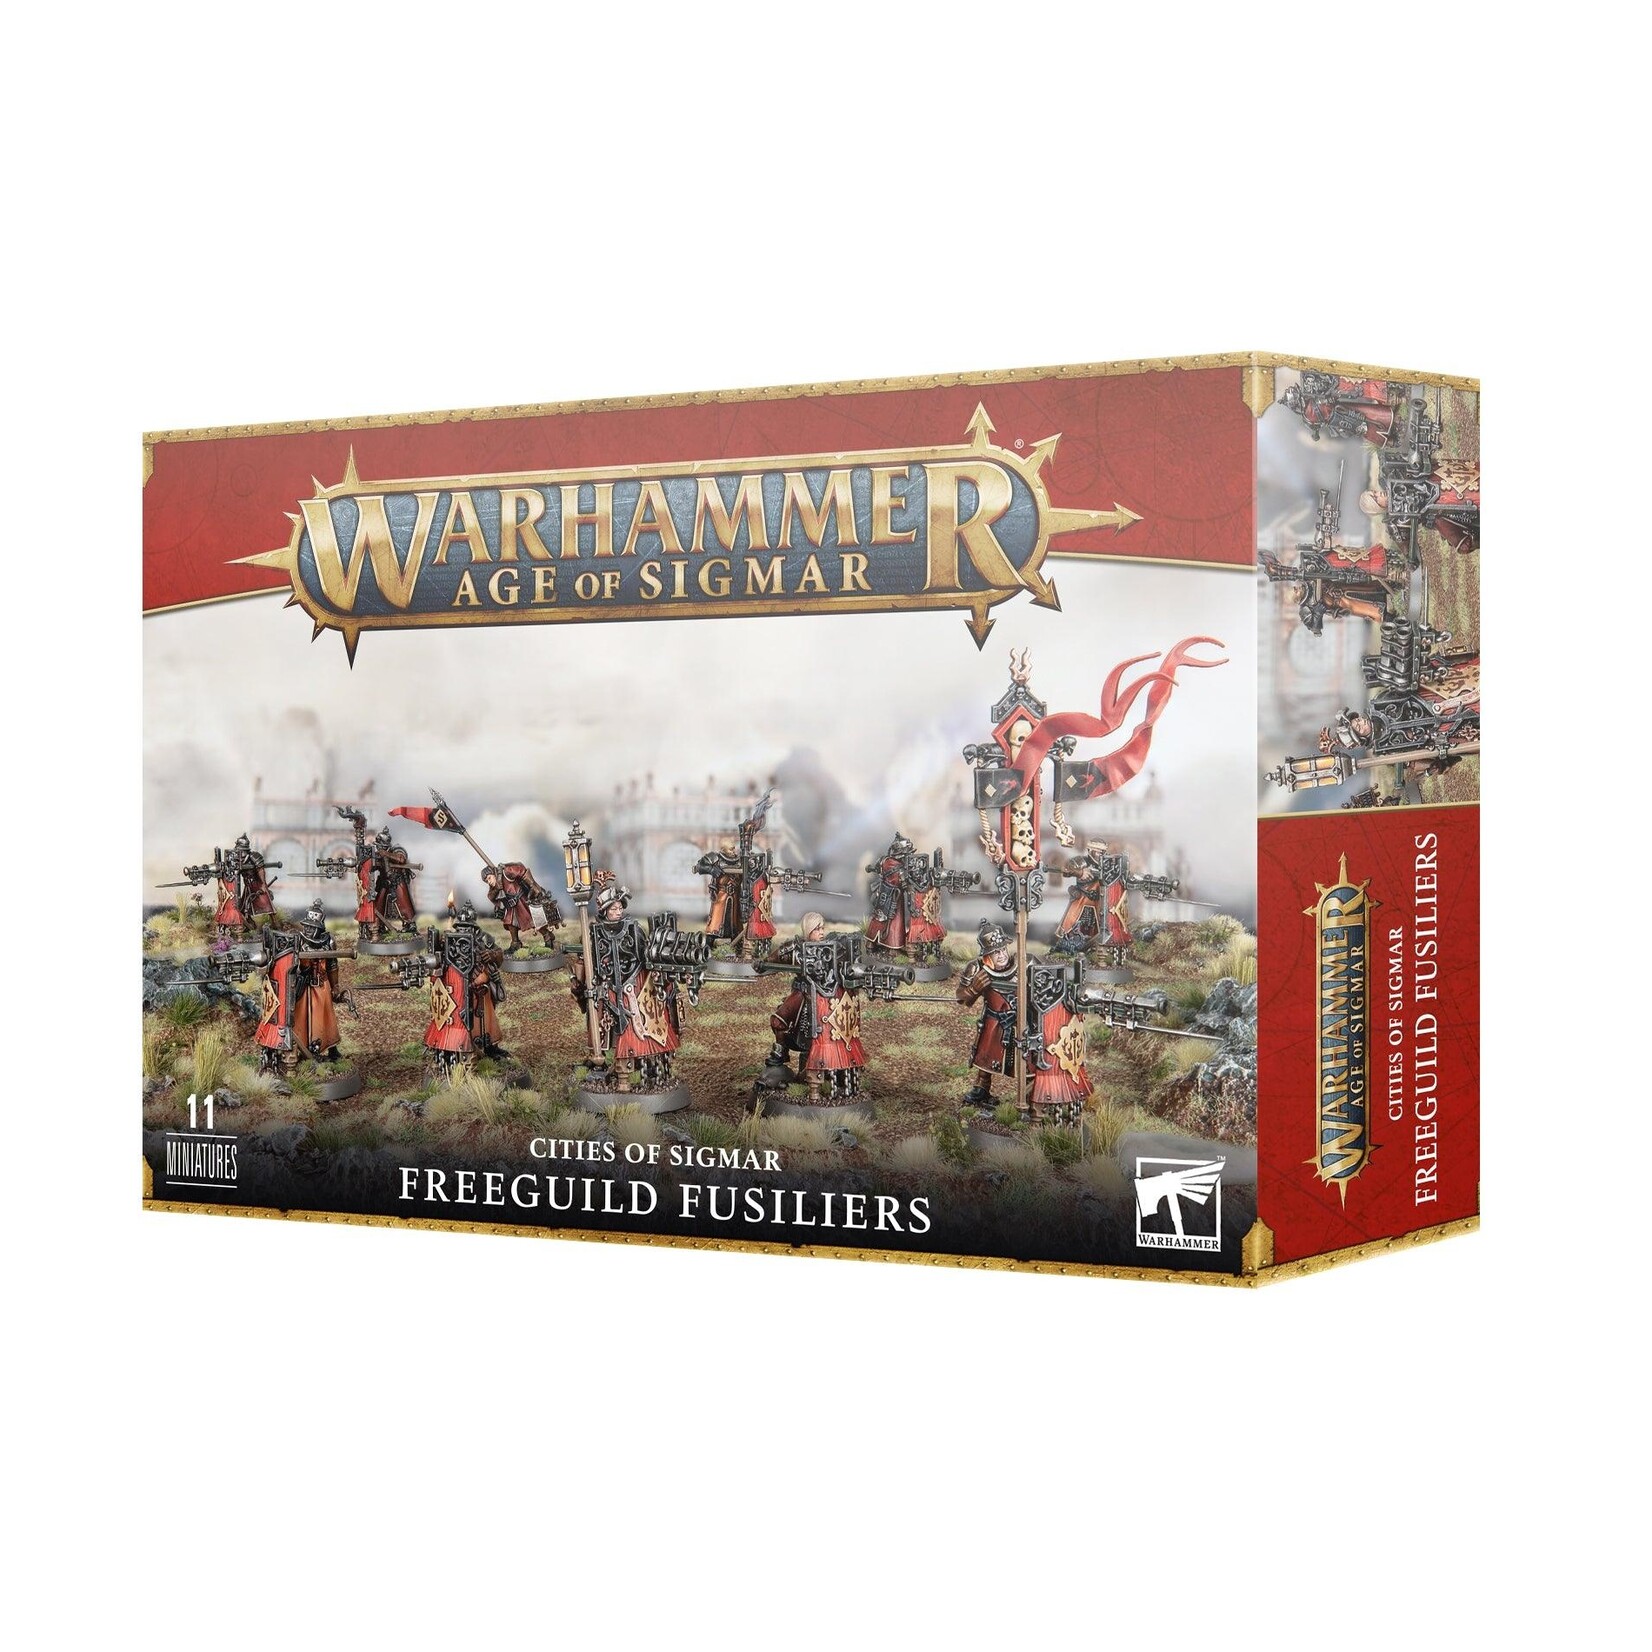 Warhammer: age of sigmar Cities of sigmar: Freeguild Fusiliers